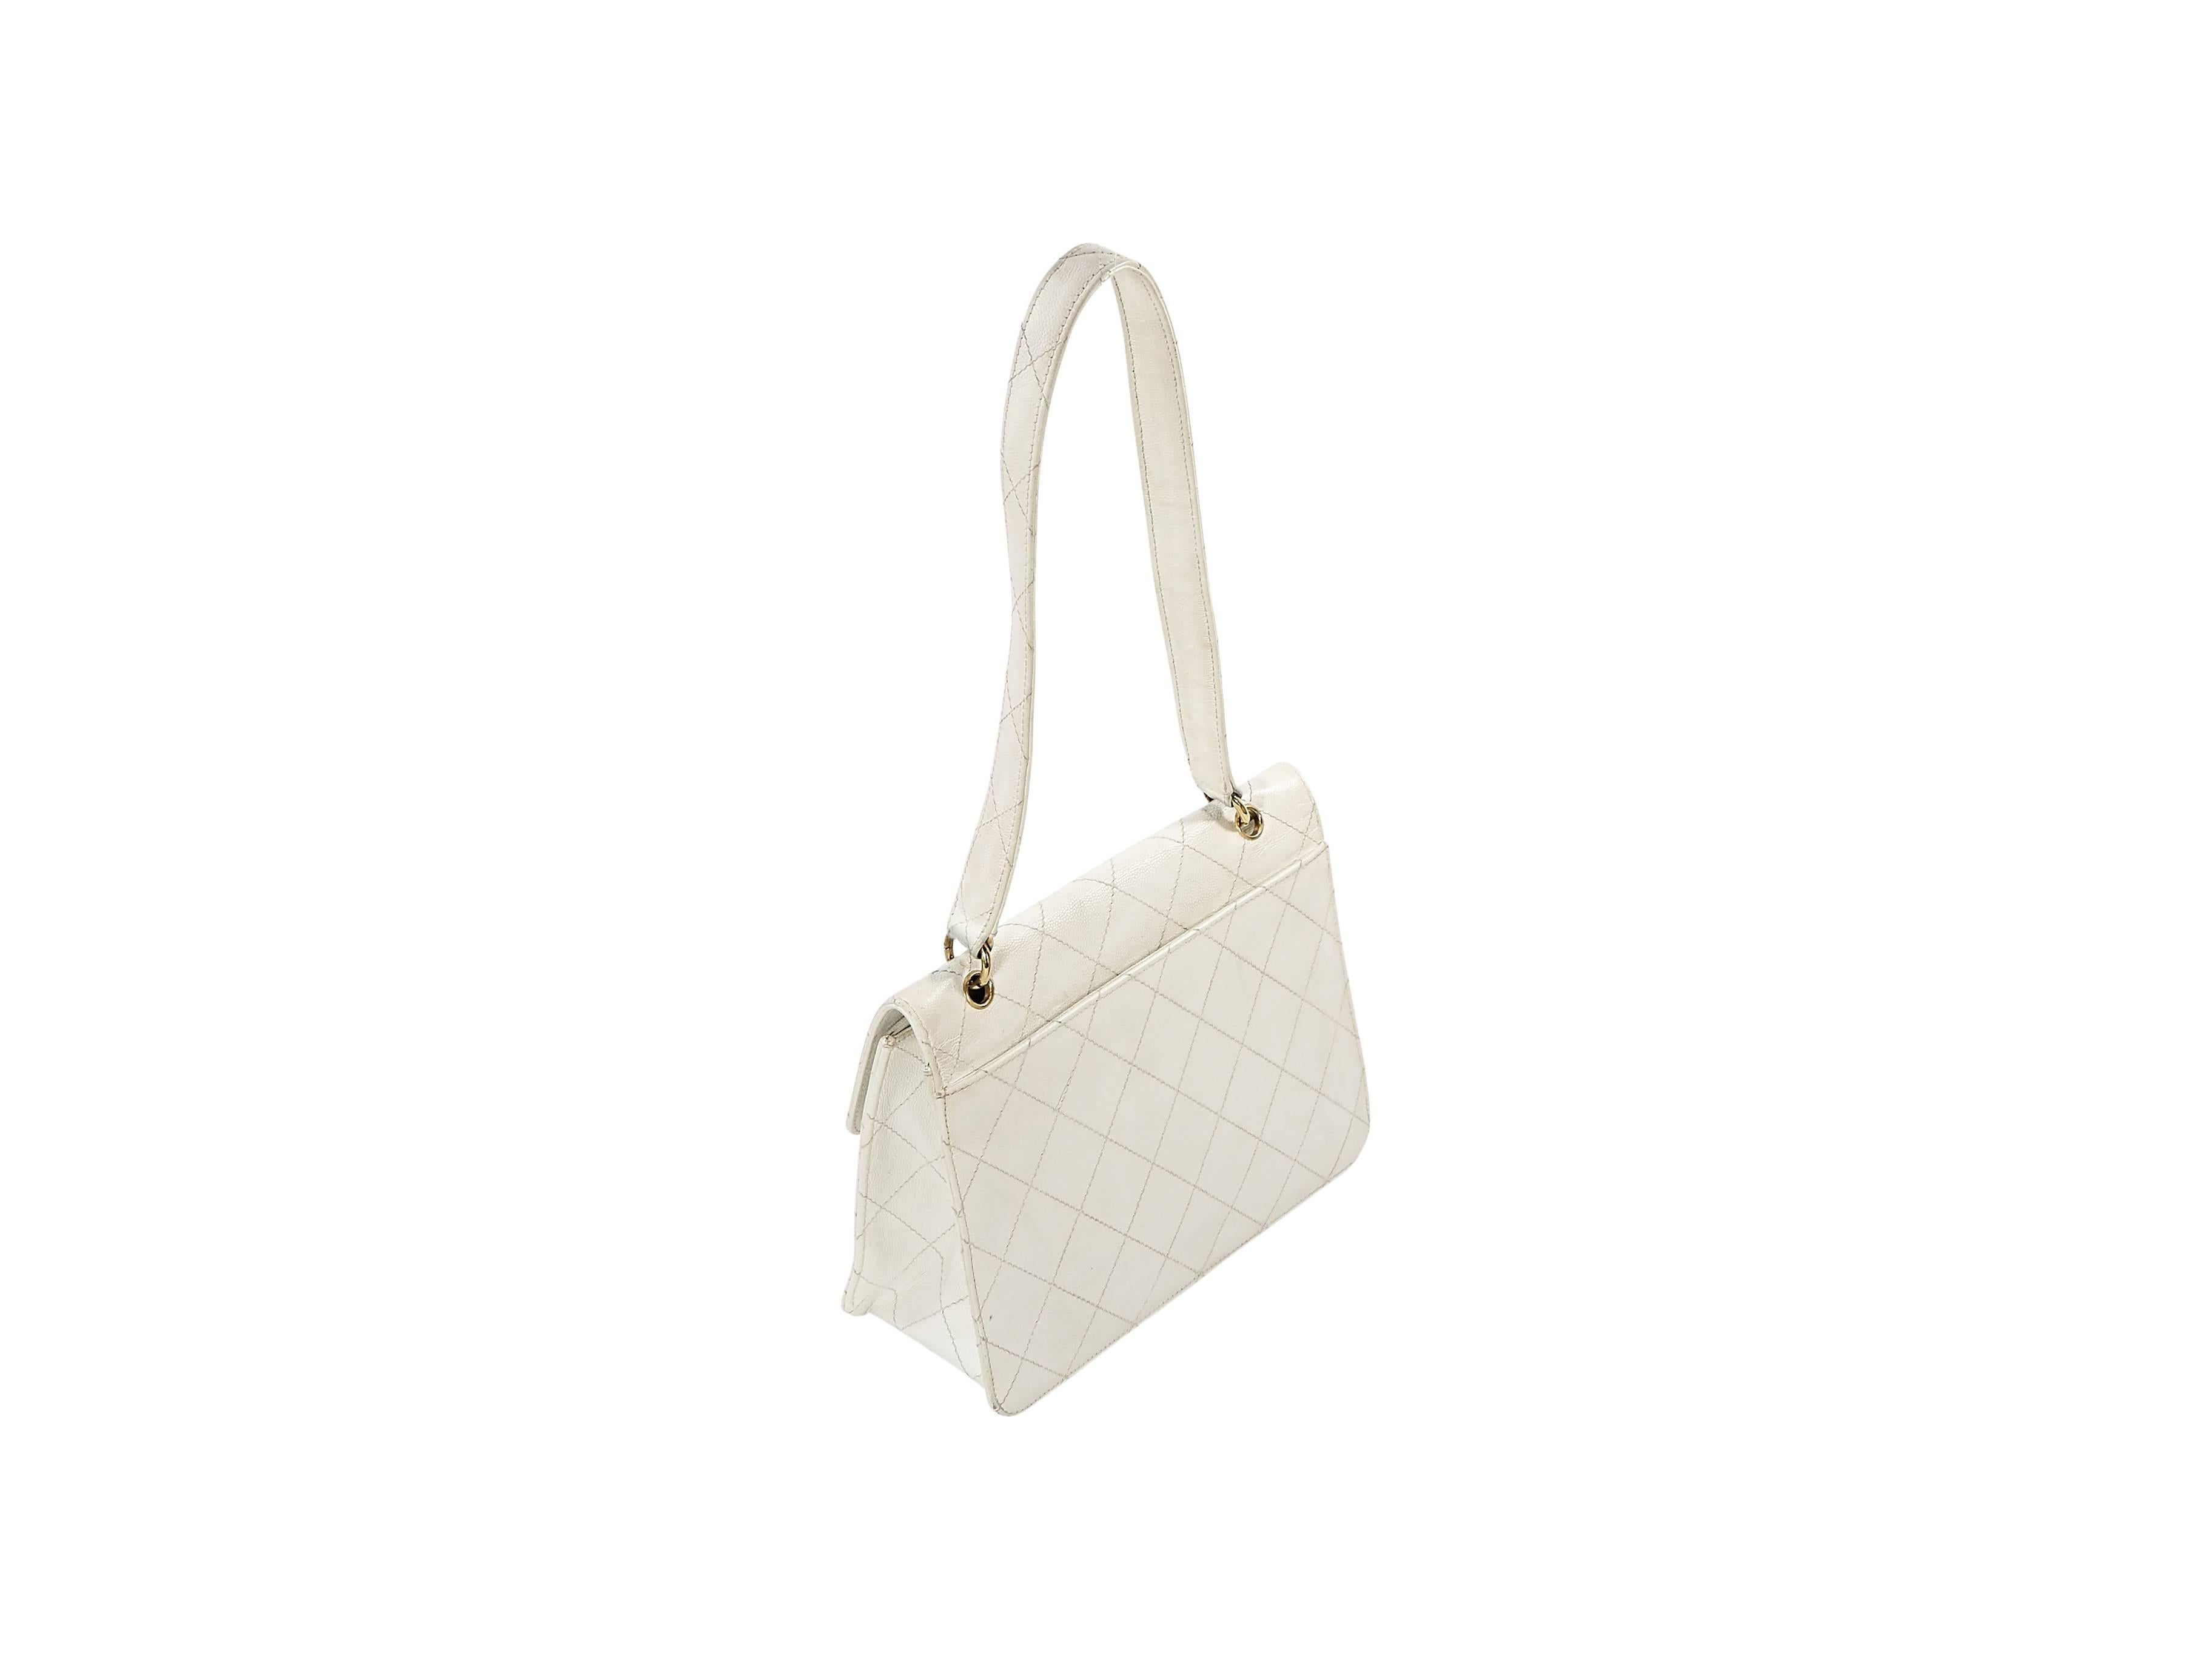 Product details:  Vintage white leather shoulder bag by Chanel.  Topstitched quilted design.  Shoulder strap.  Twist-lock logo closure.  Leather lined interior with inner zip and slide pockets.  Goldtone hardware.  Authenticity card included.  10